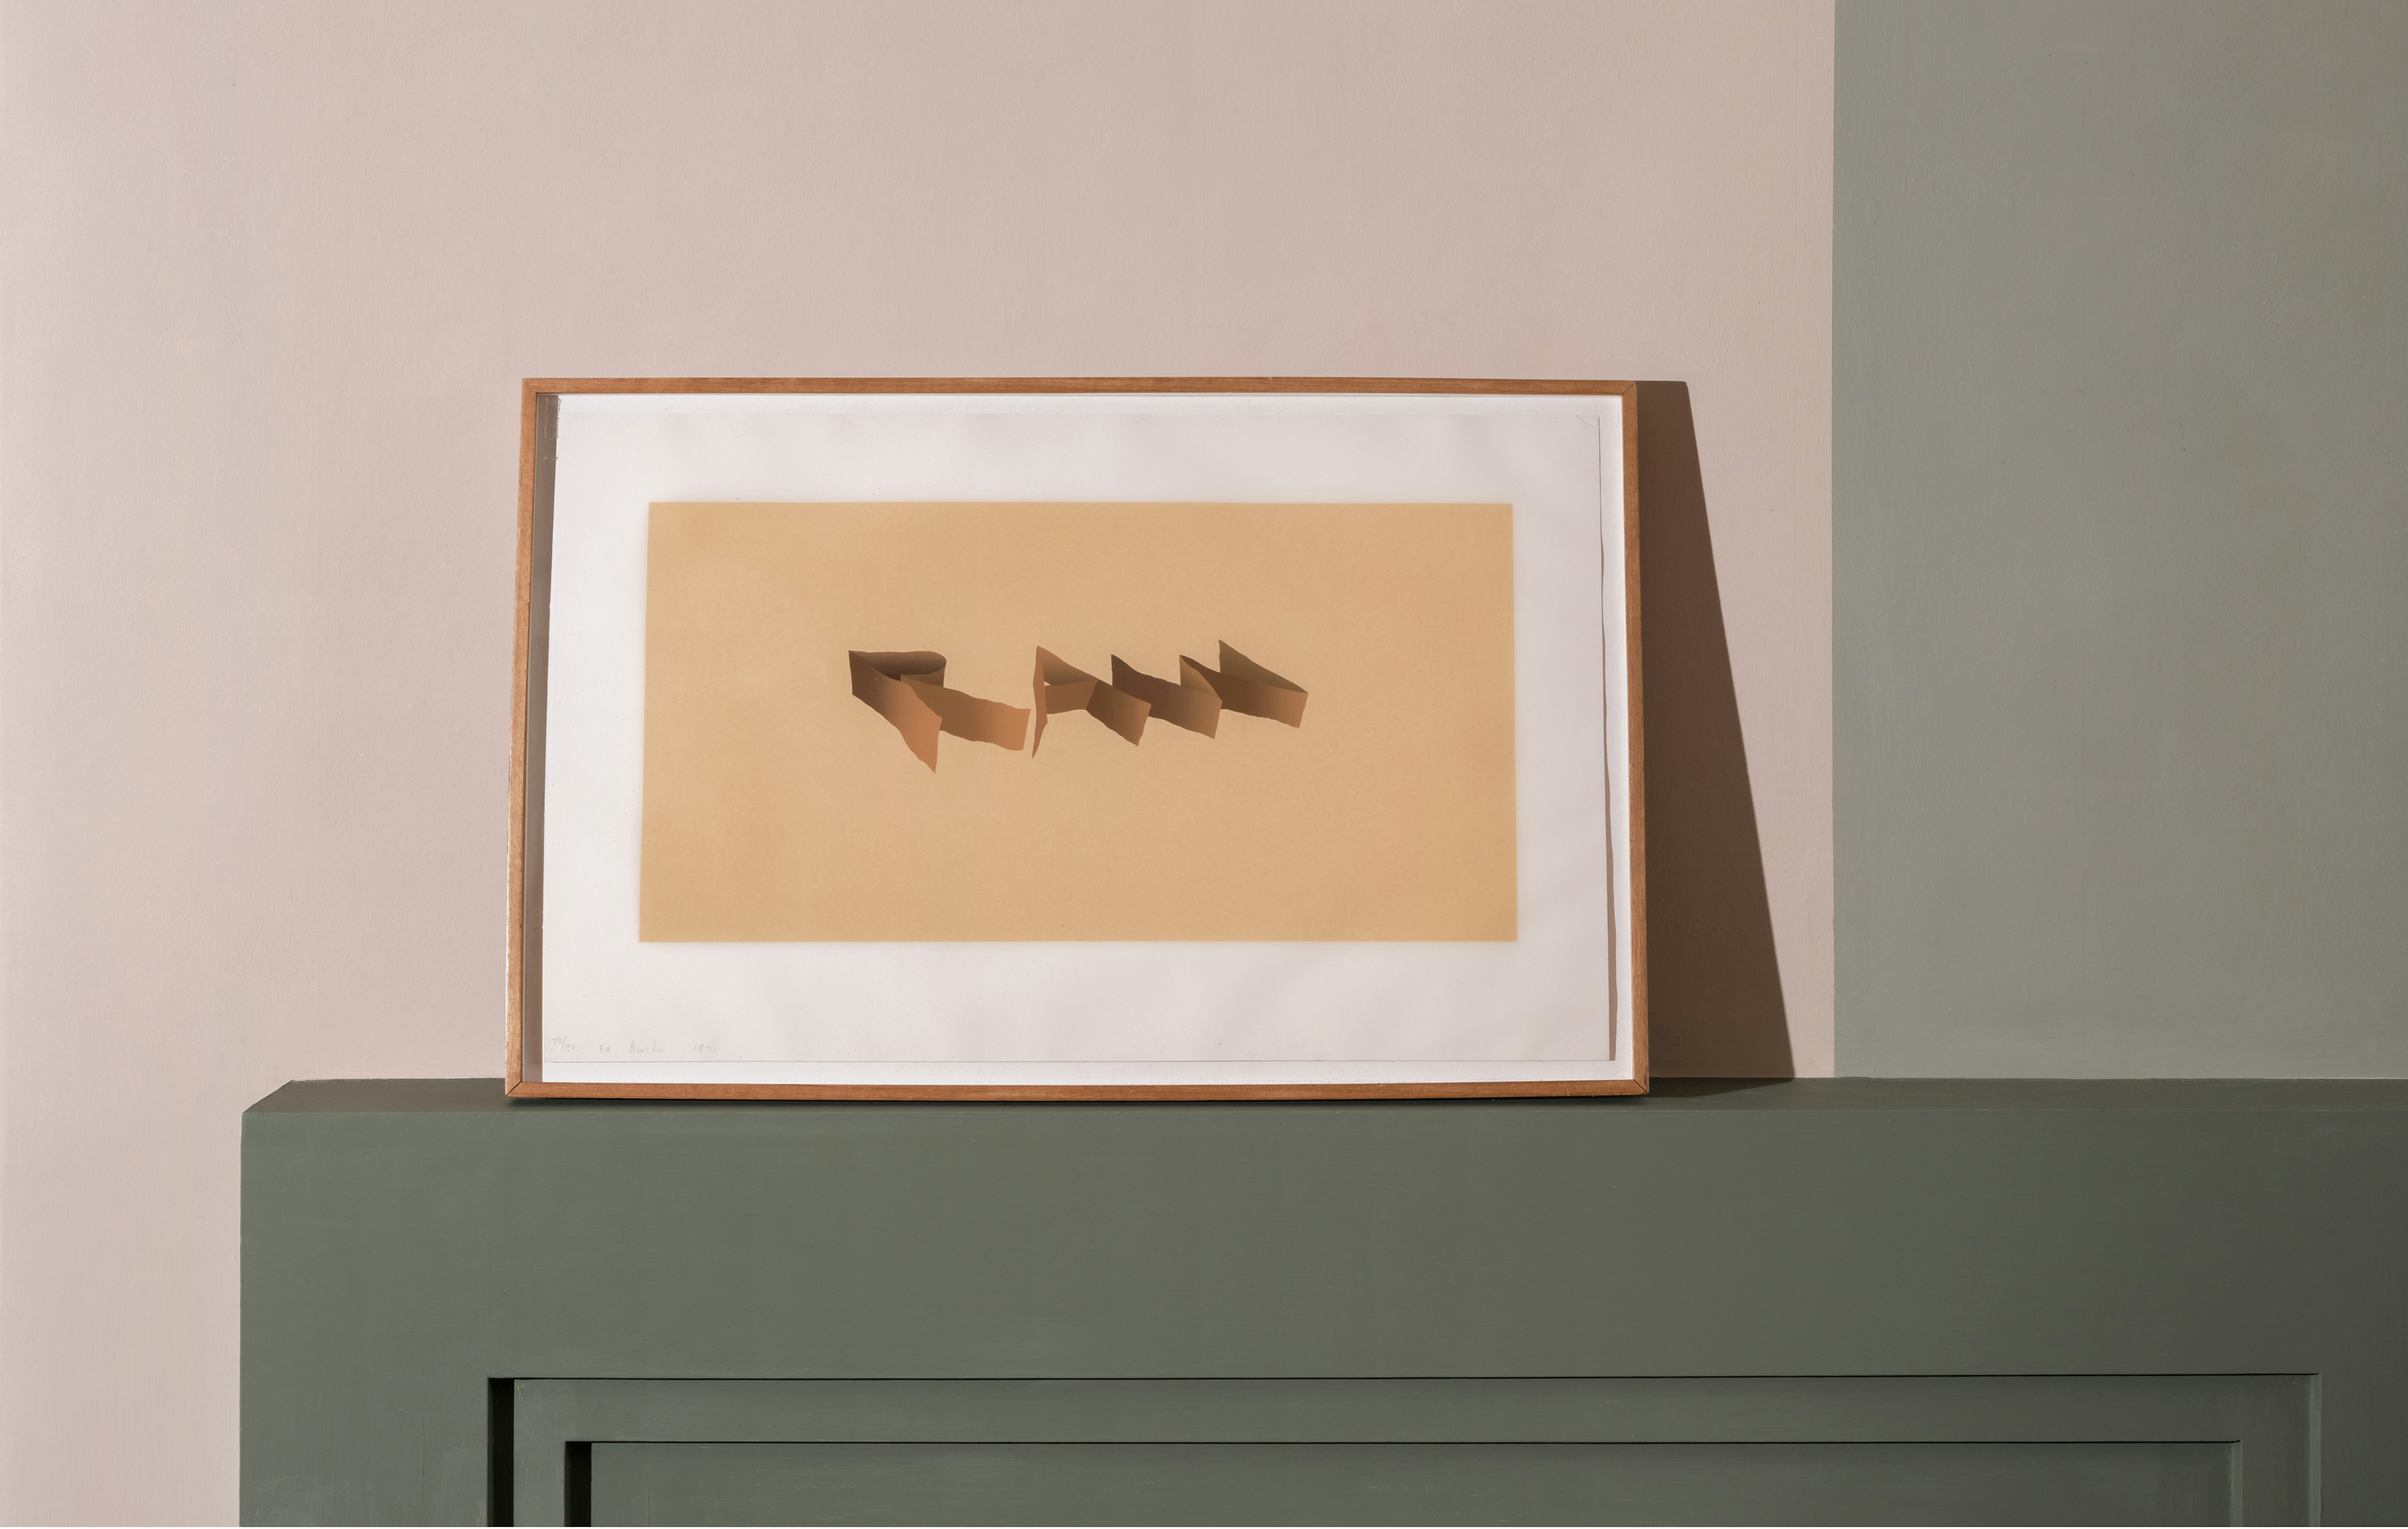 installation photograph of framed screenprint by Ed Ruscha in mustard yellow overlaid with the word raw in capital letters in perspective and slightly skewed in darker tone brown-yellow